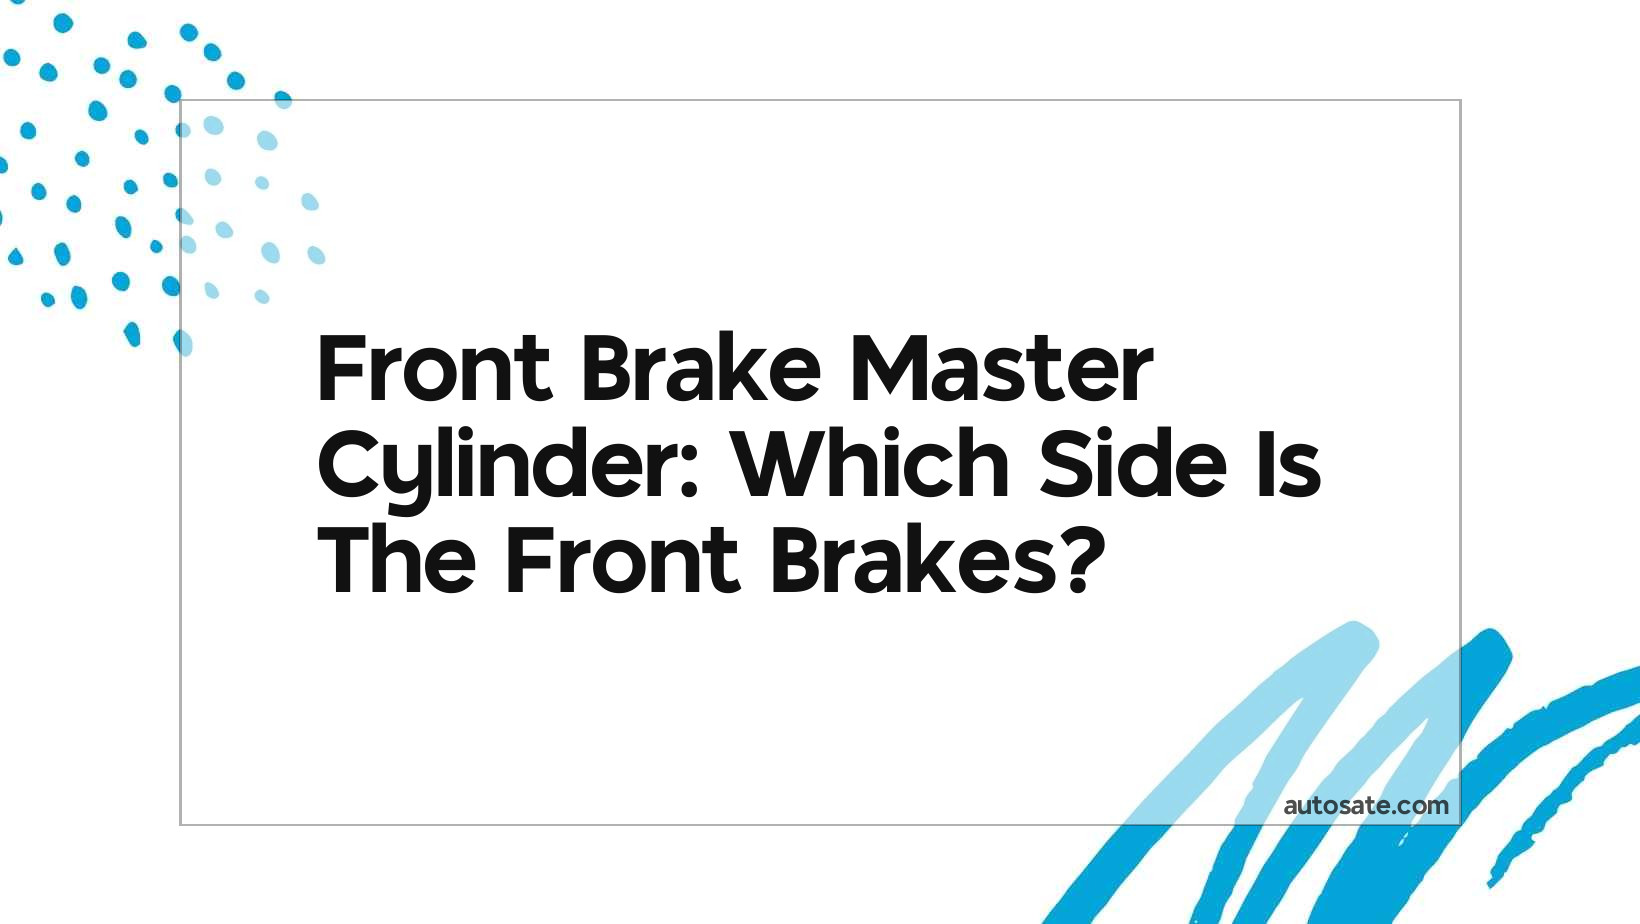 Front Brake Master Cylinder: Which Side Is The Front Brakes?